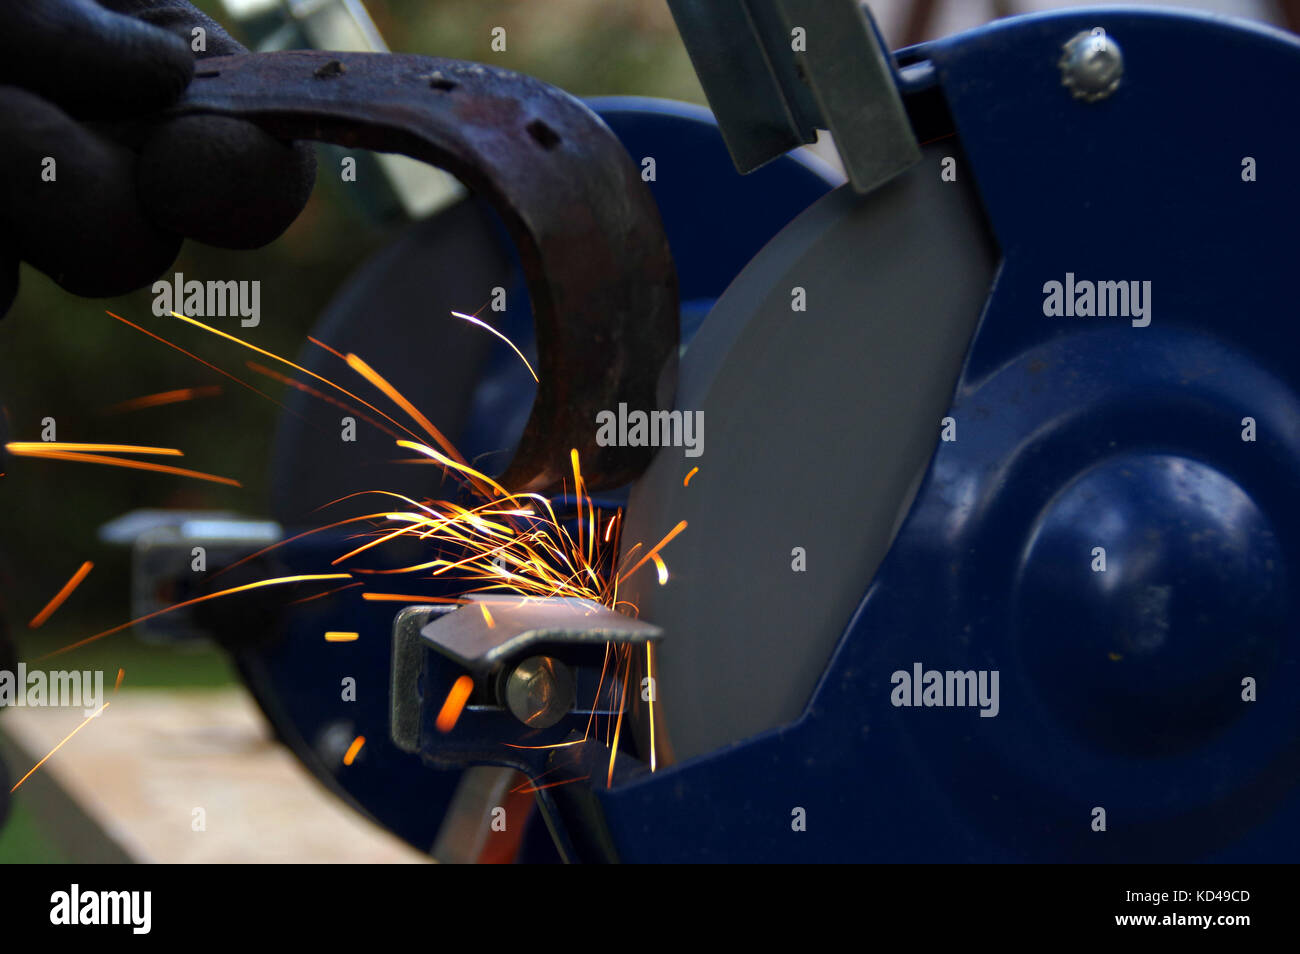 Electric wheel grinding with light sparks and gleam. Industry theme background. Stock Photo